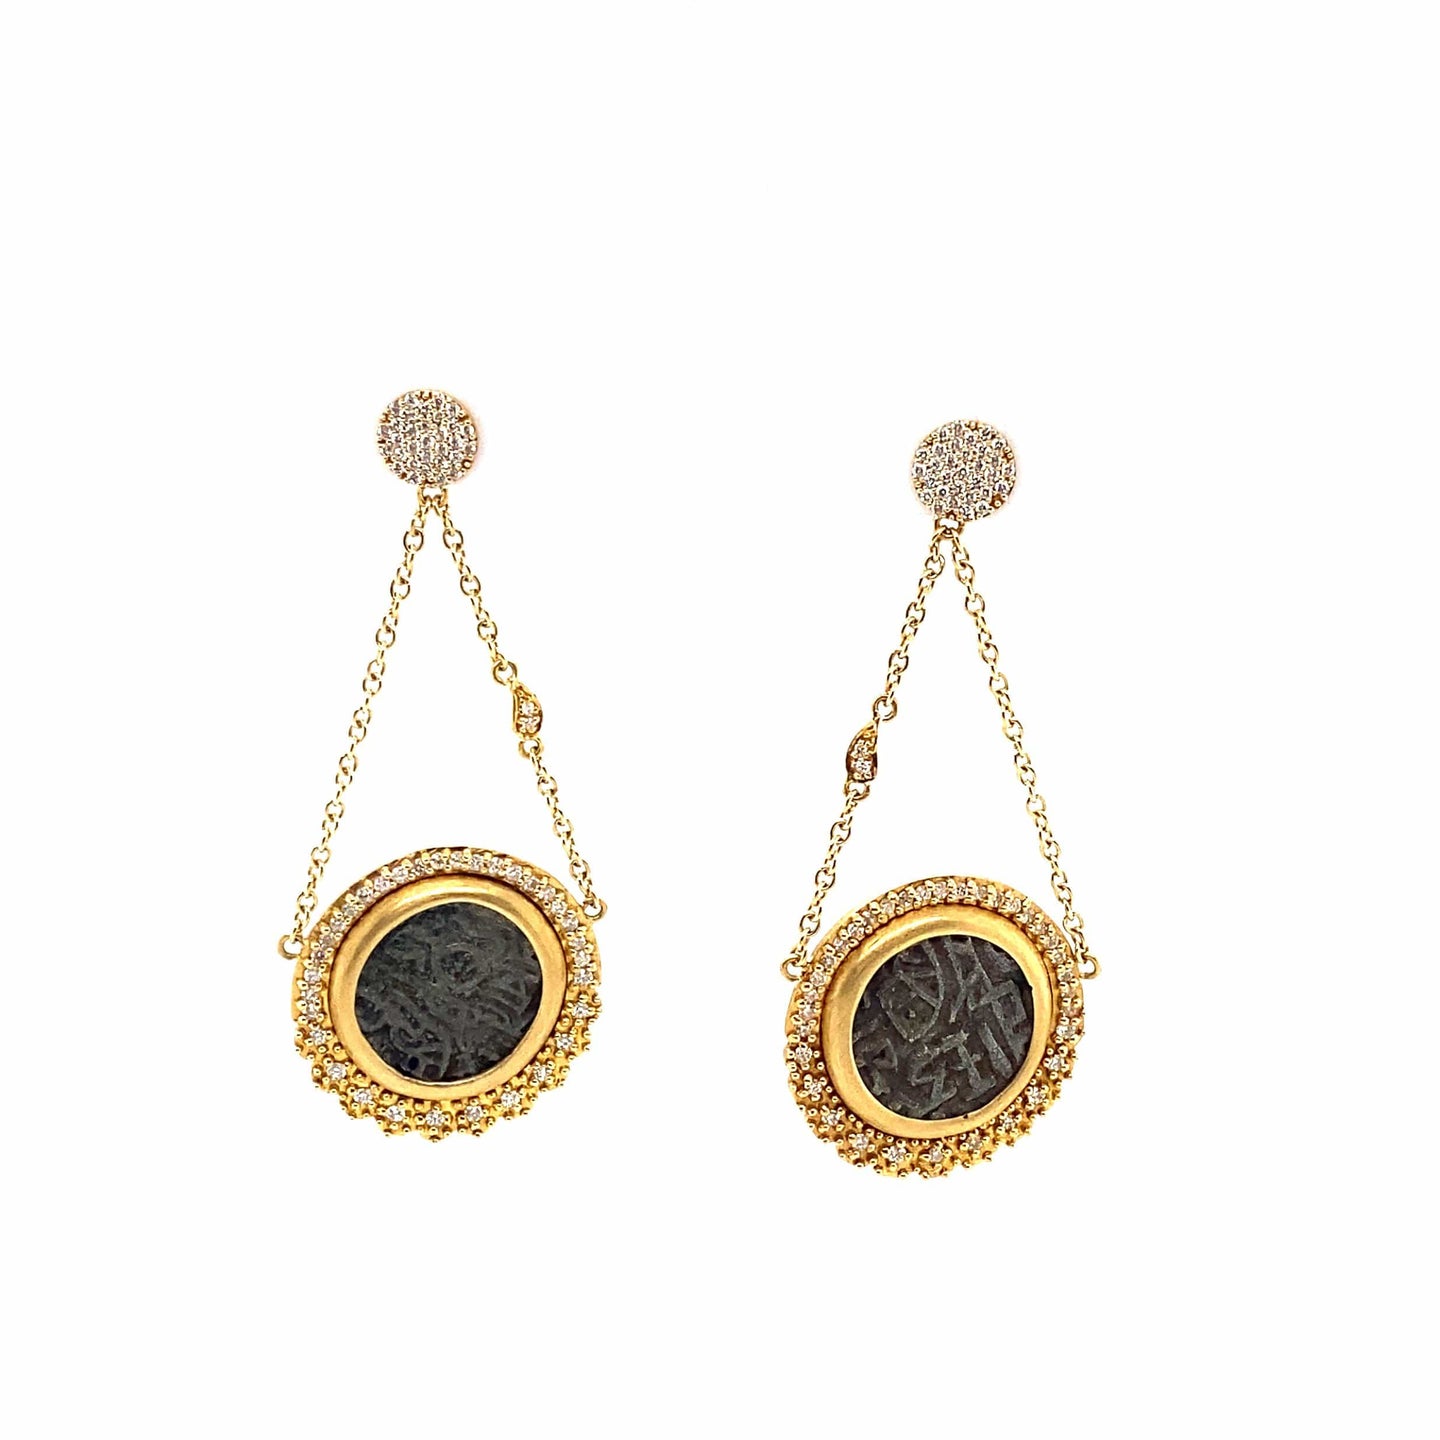 Antiquity Kushan Coin Dangle Earrings with Brilliant-Cut Diamonds - Coomi